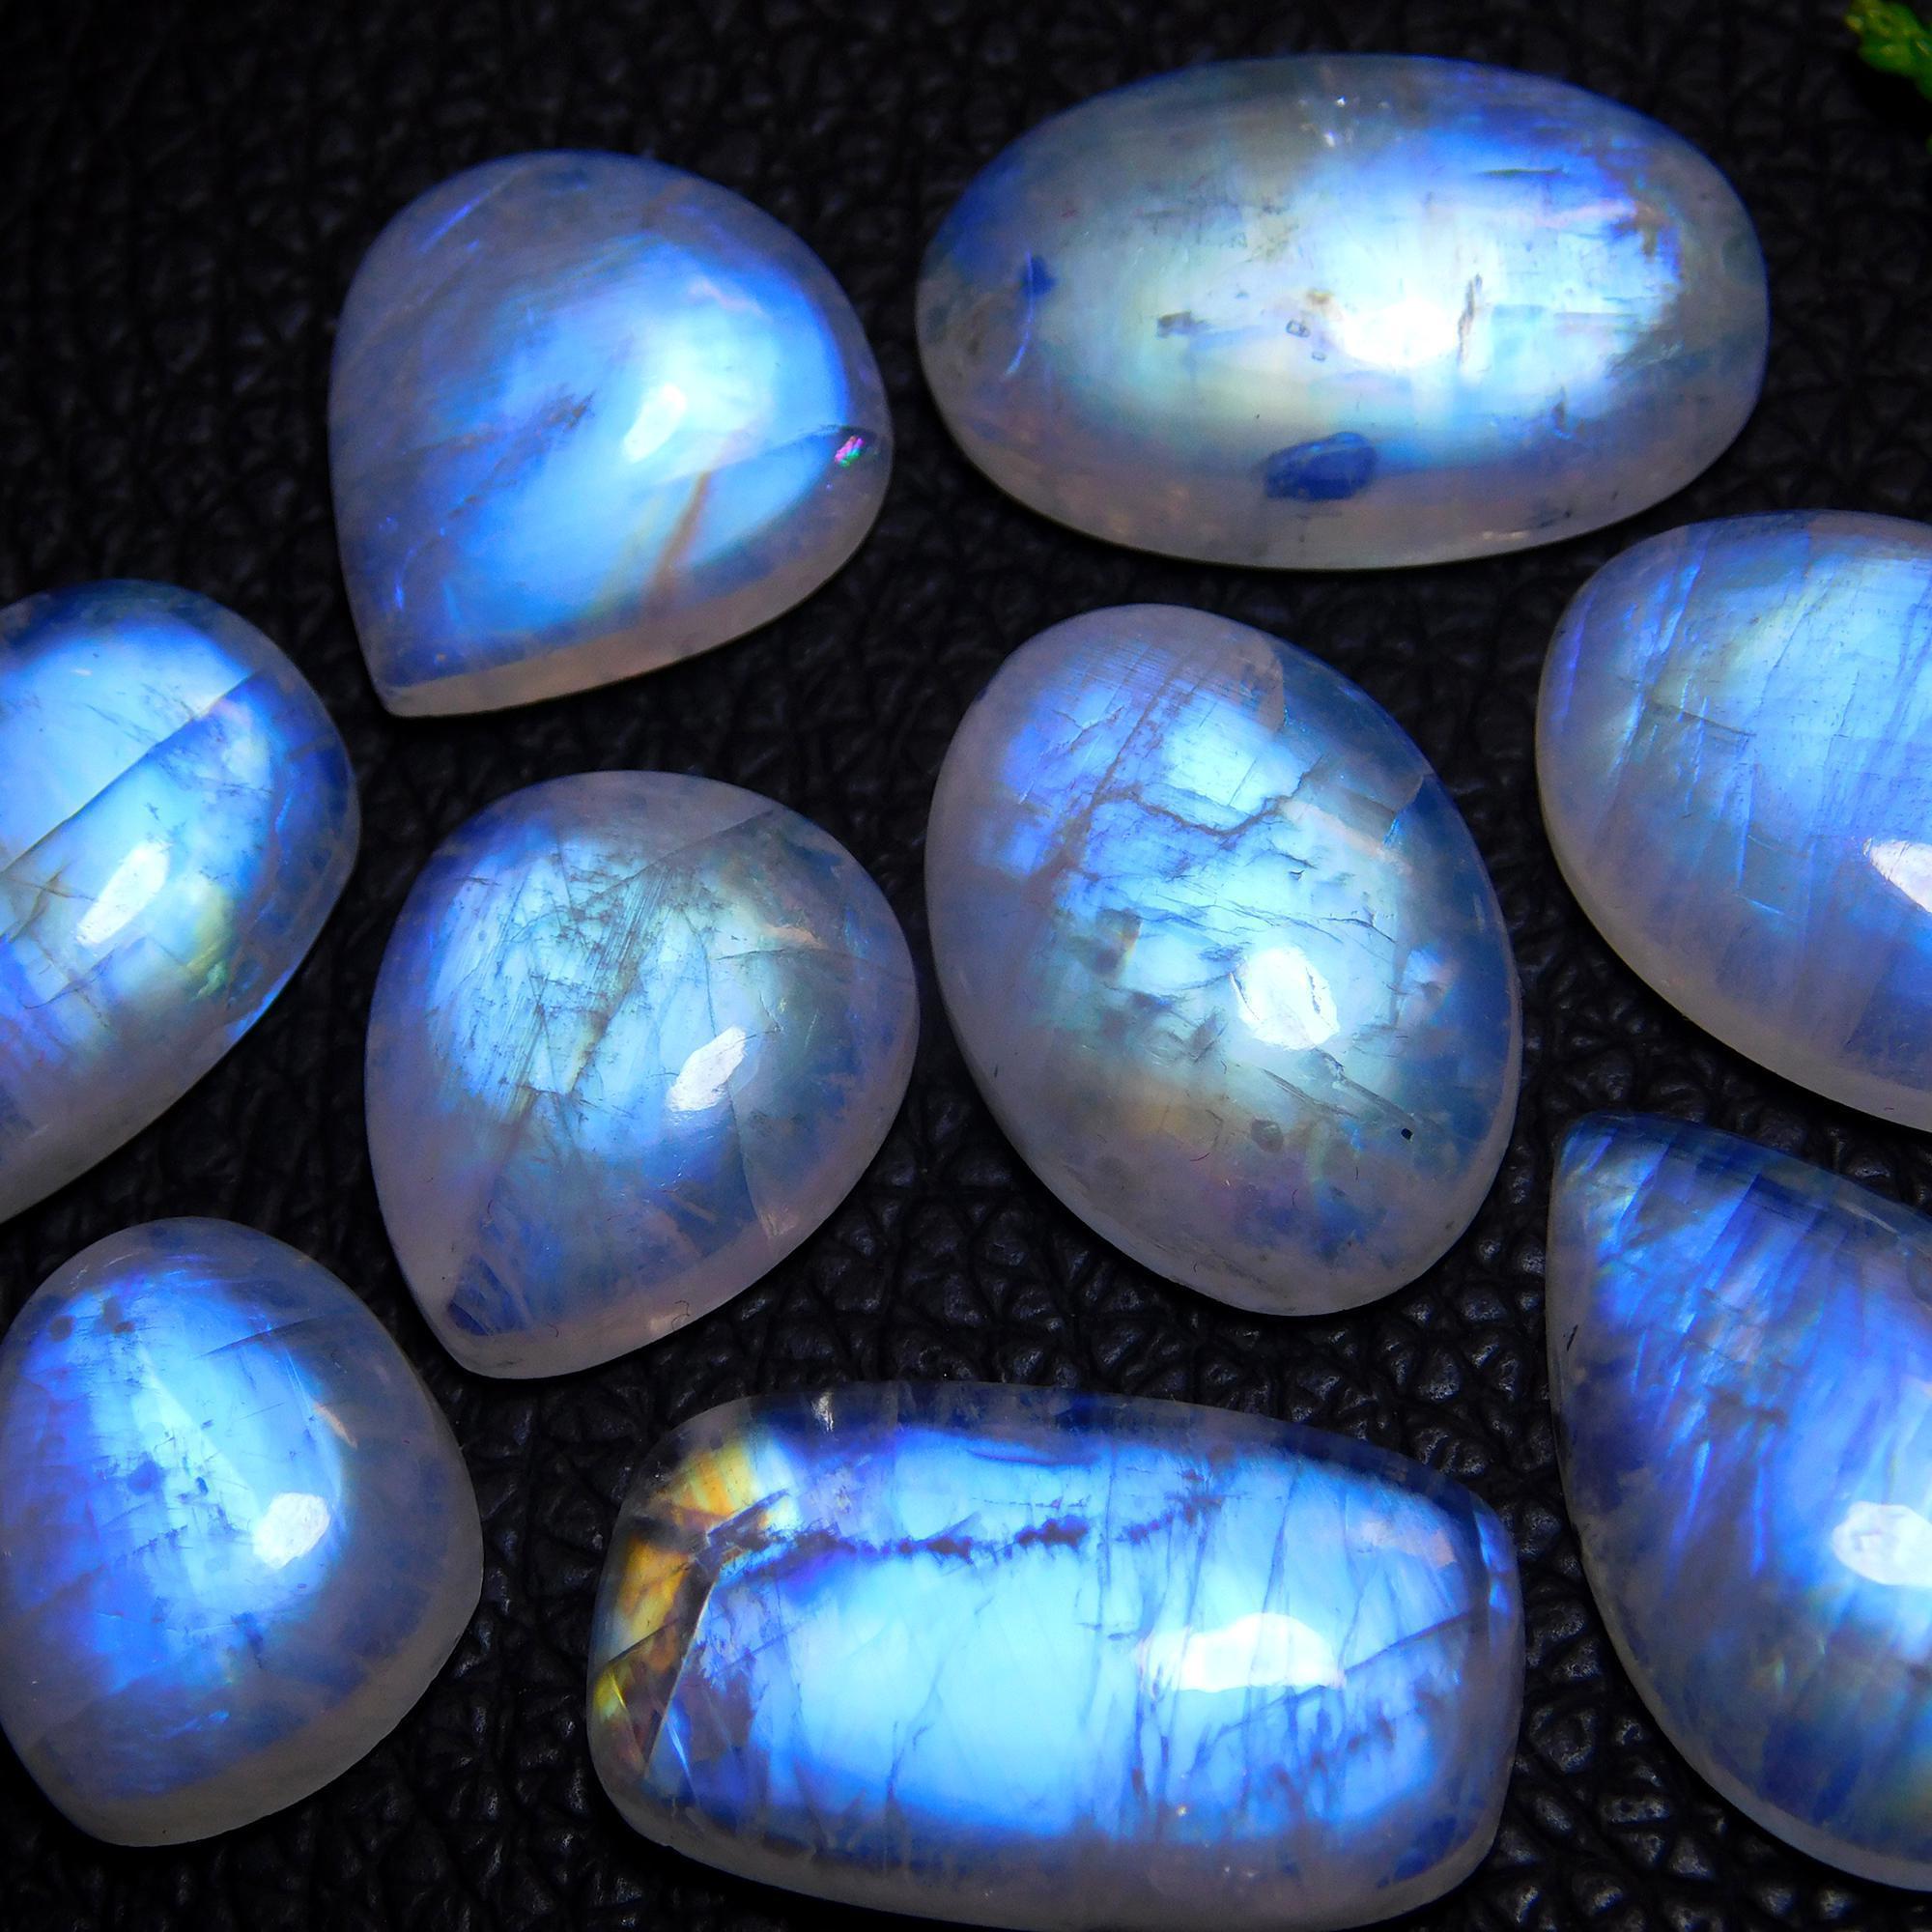 9Pcs 98Cts Natural Rainbow Moonstone Cabochon Blue Fire Loose Gemstone Crystal jewelry supplies wholesale lot gift for her Black Friday  22X14 15X12mm#9432